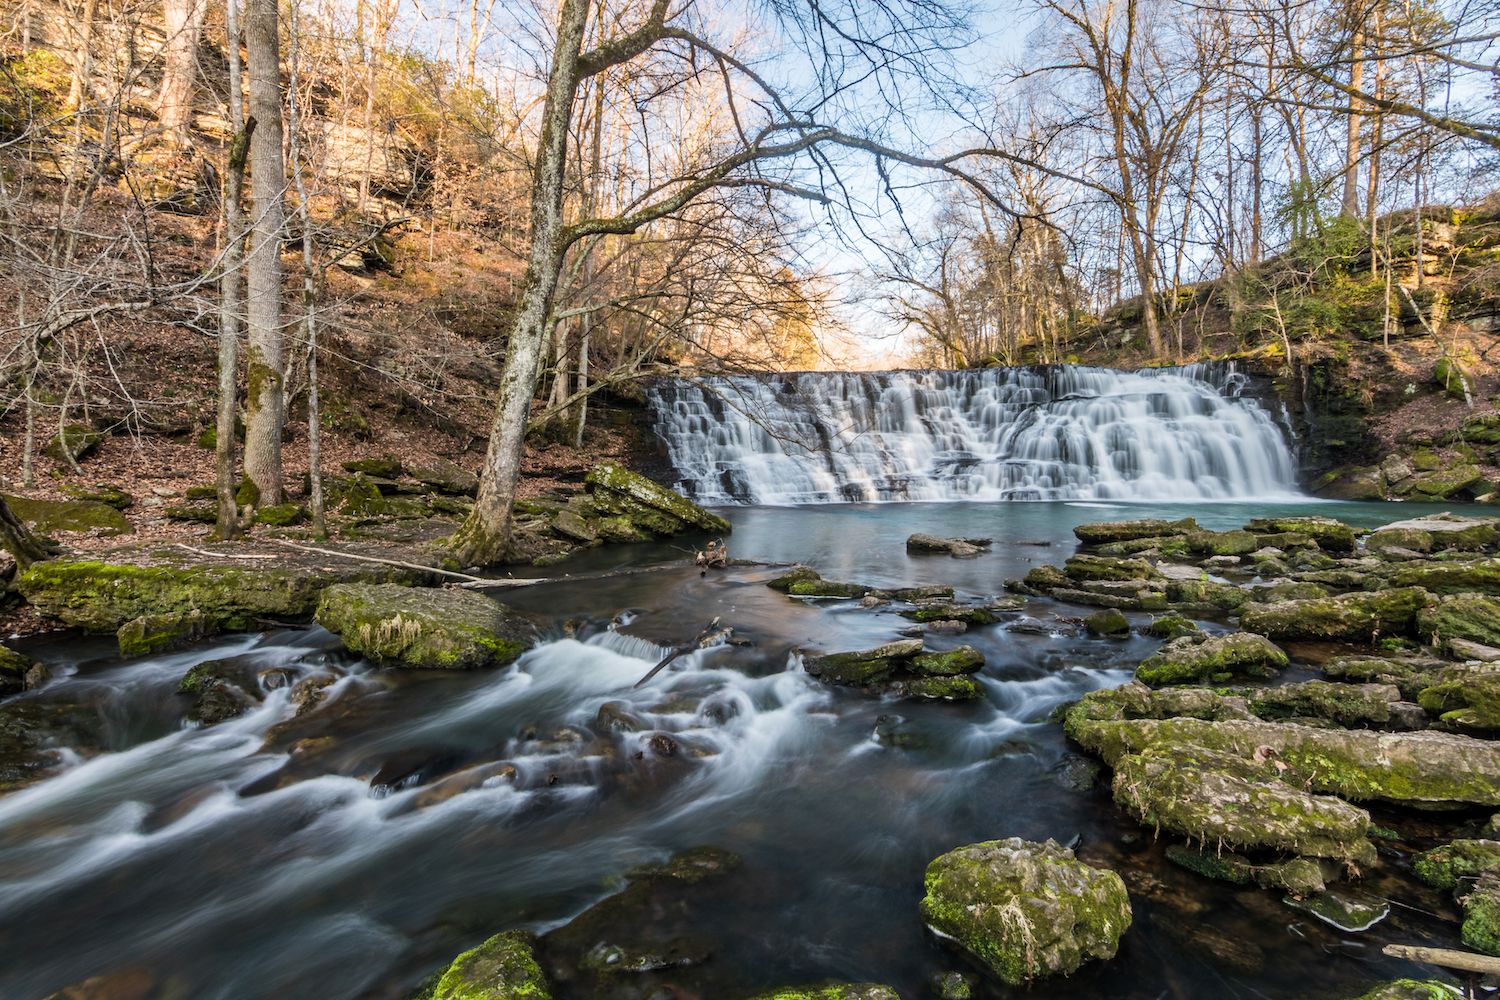 15 Best Things to Do in Tullahoma, TN - Travel Lens